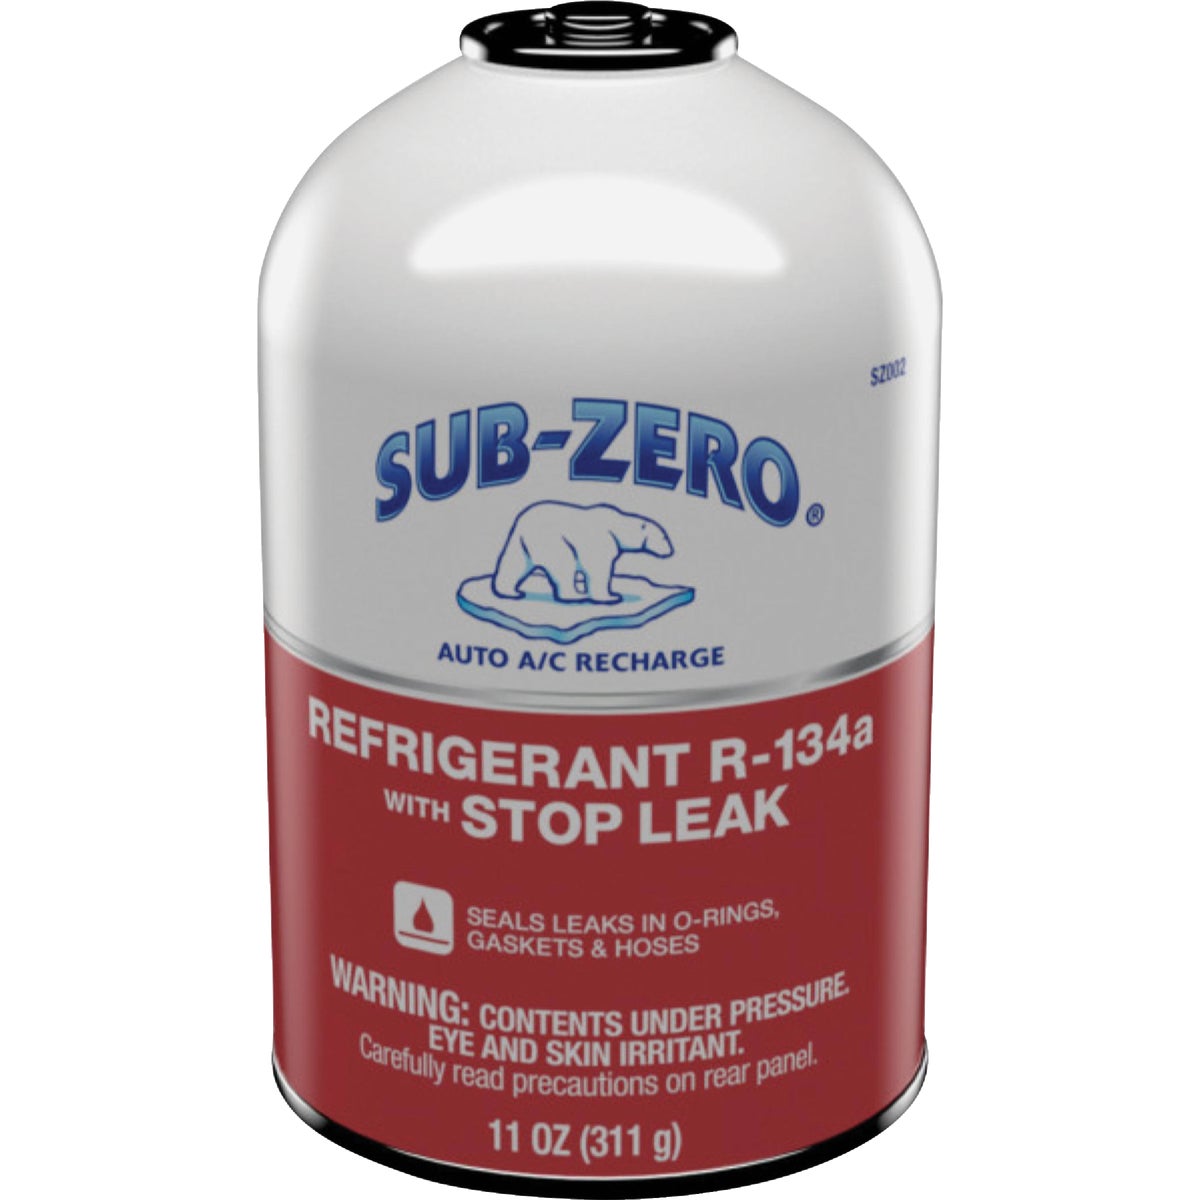 Item 570915, Sub-Zero R-134a with Stop Leak contains 11 oz. of R-134a and additives.